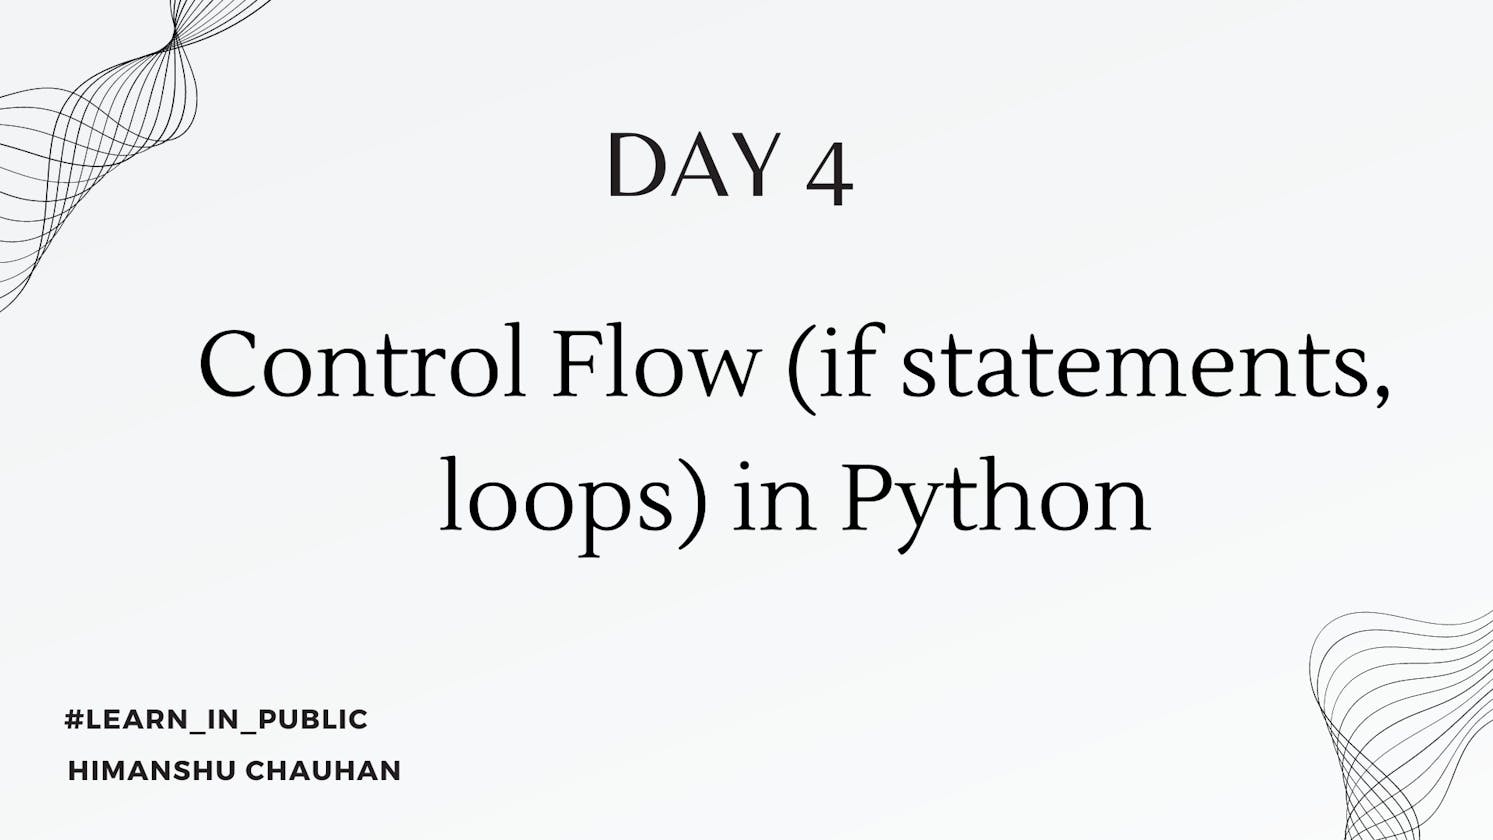 Day 4: Control Flow (if statements, loops) in Python